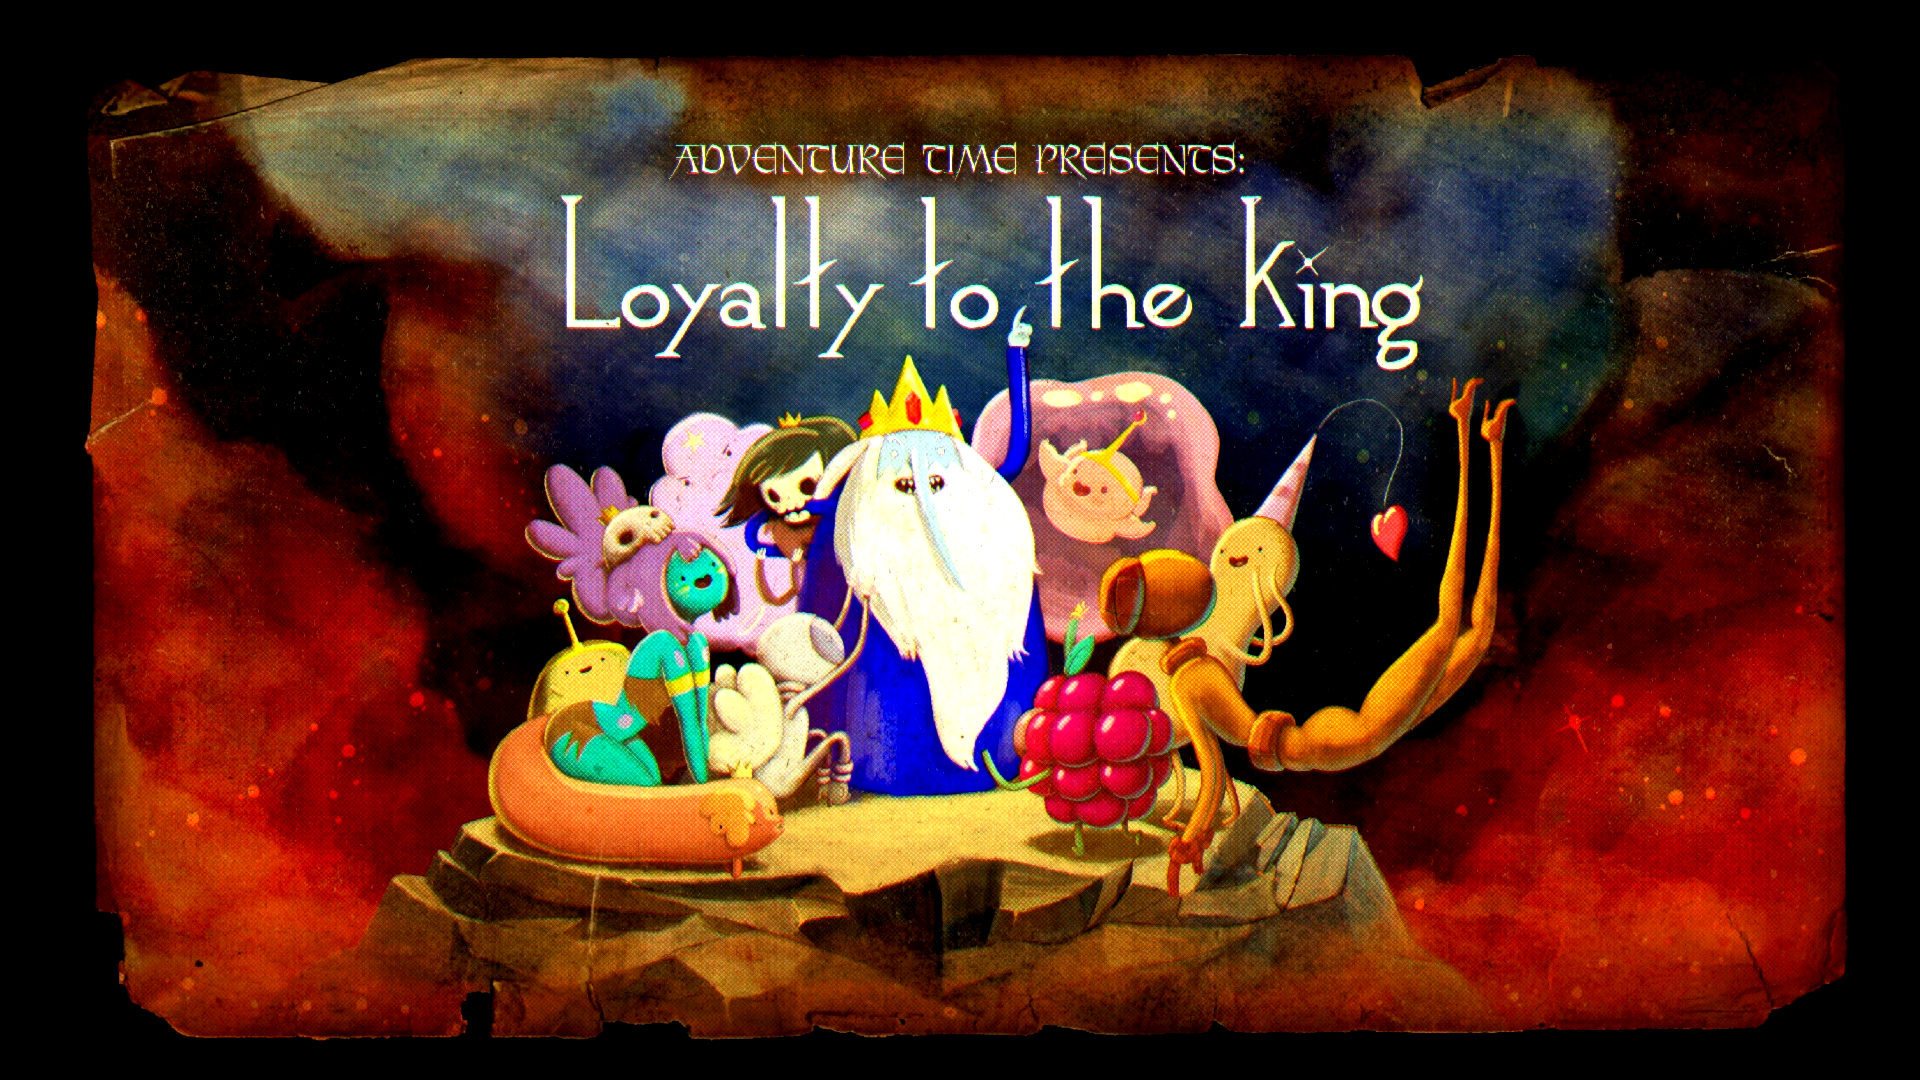 King of OOO: Checkmate (Stakes Pt. 7) - title card designed and